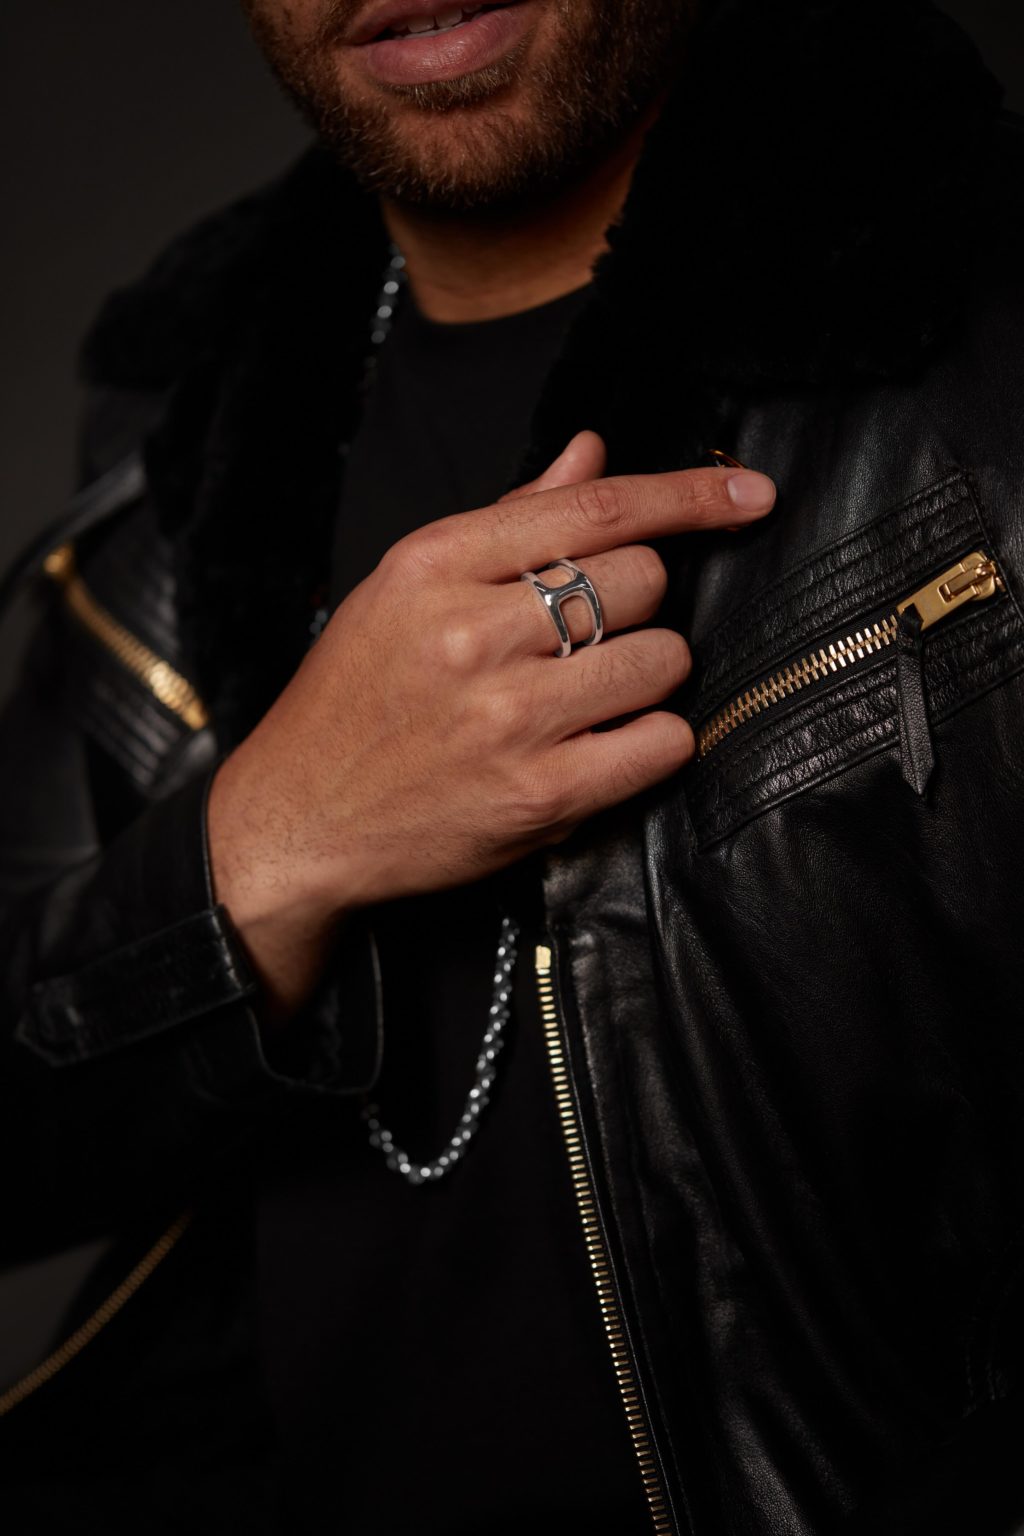 A male model with black jerkin showing his hand with a ring on his finger